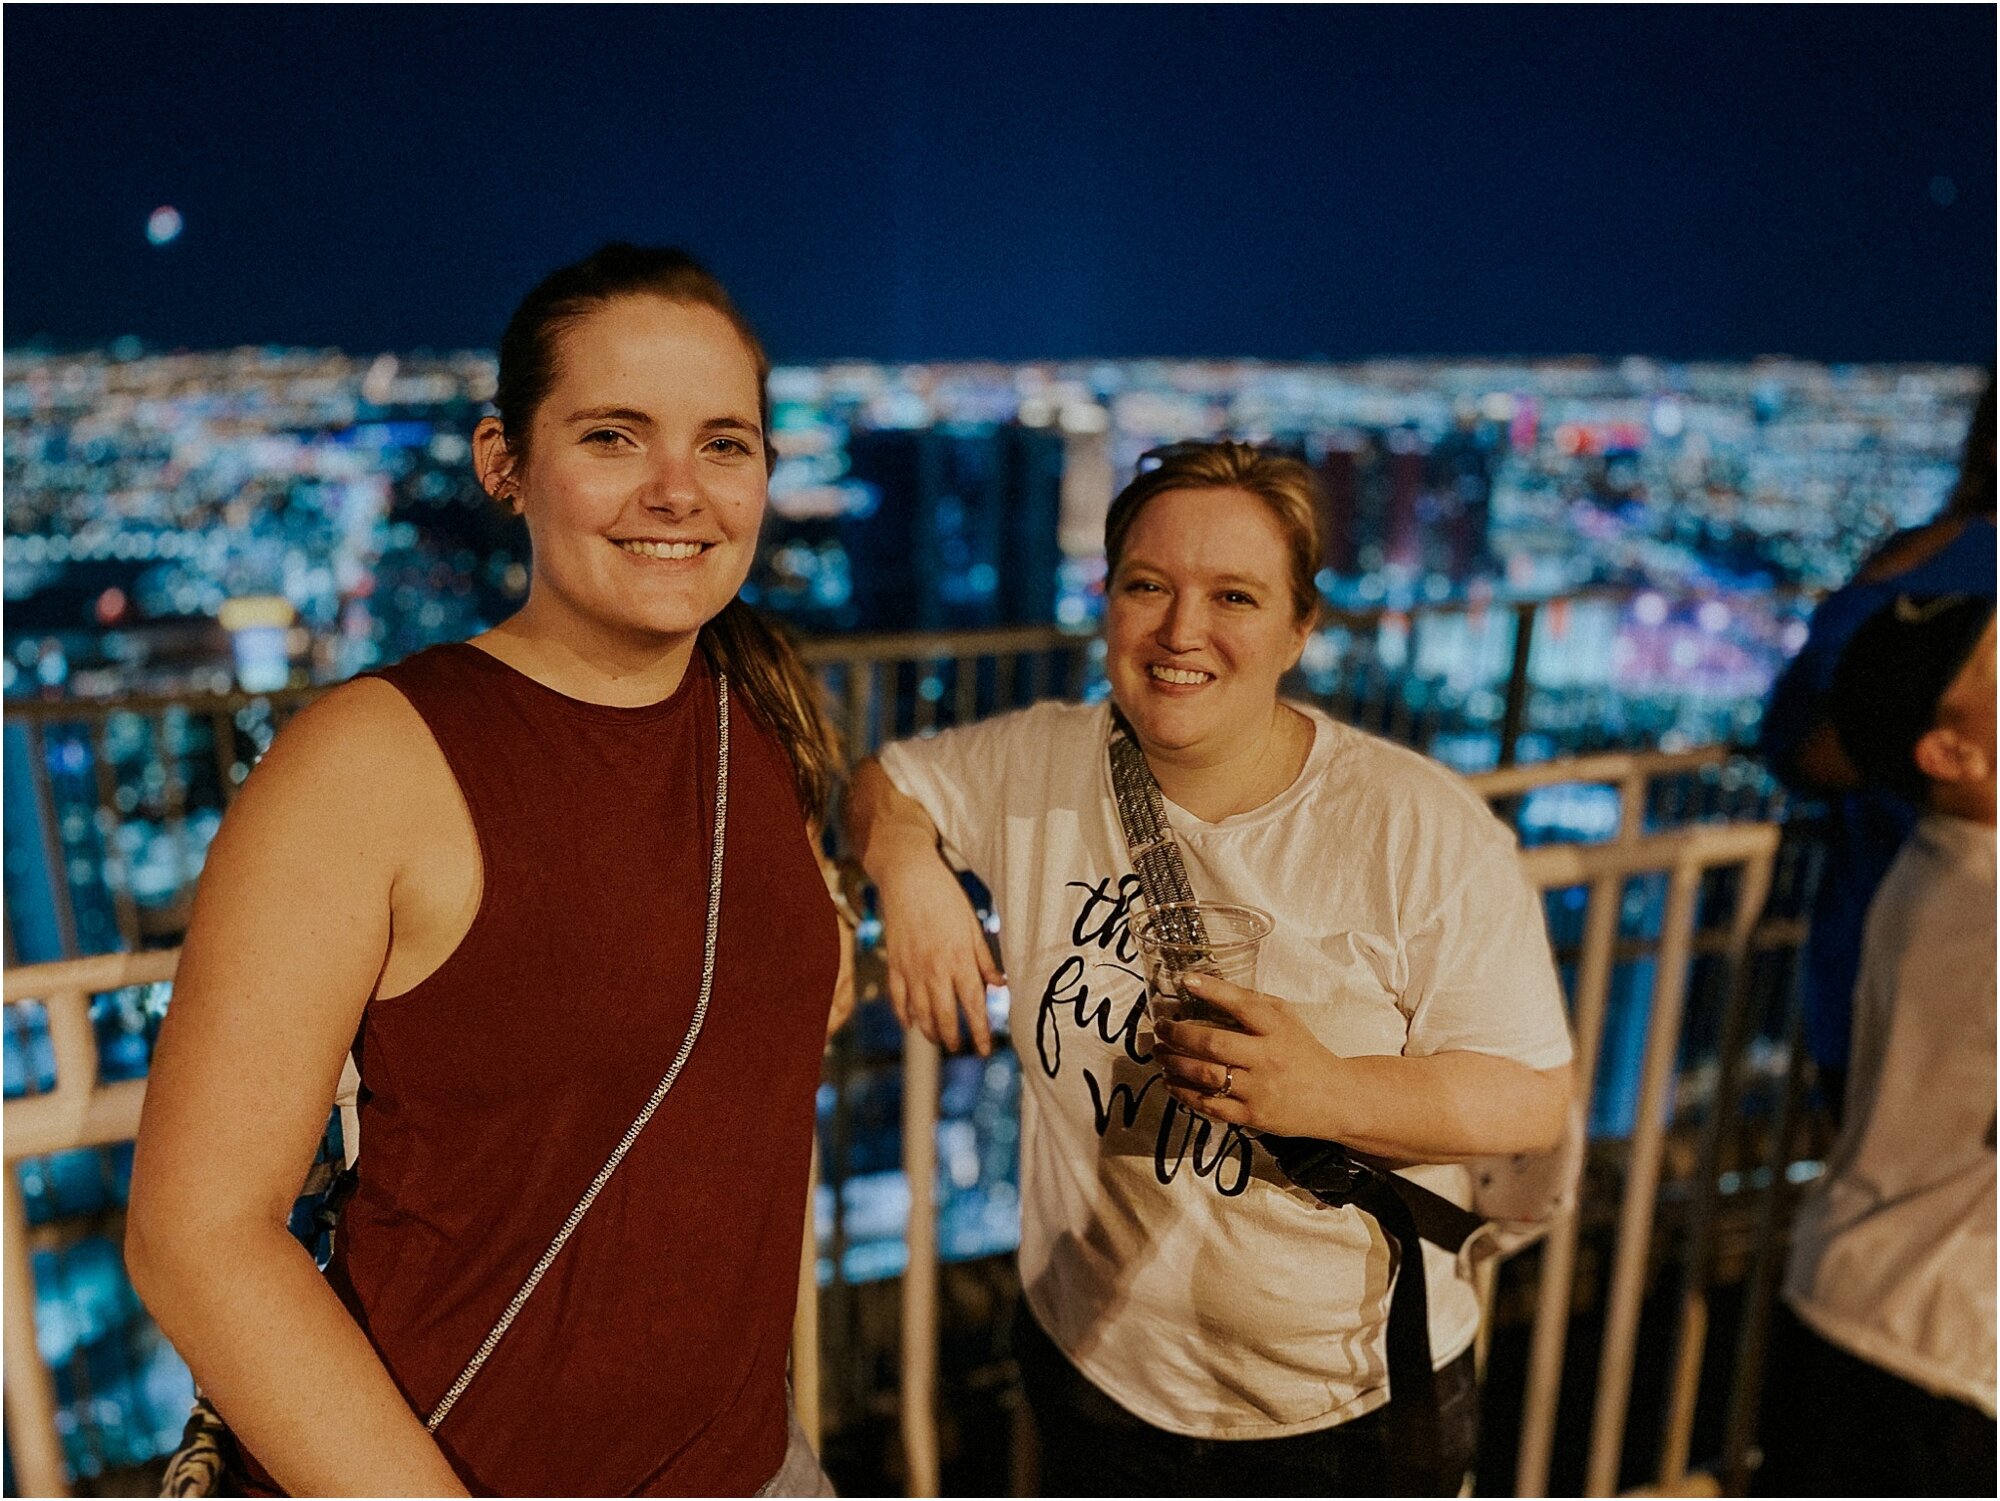   As we settled into Pacific Standard Time, we got to explore the city- including the top of the Stratosphere hotel!   Photo: Jeff Patterson   